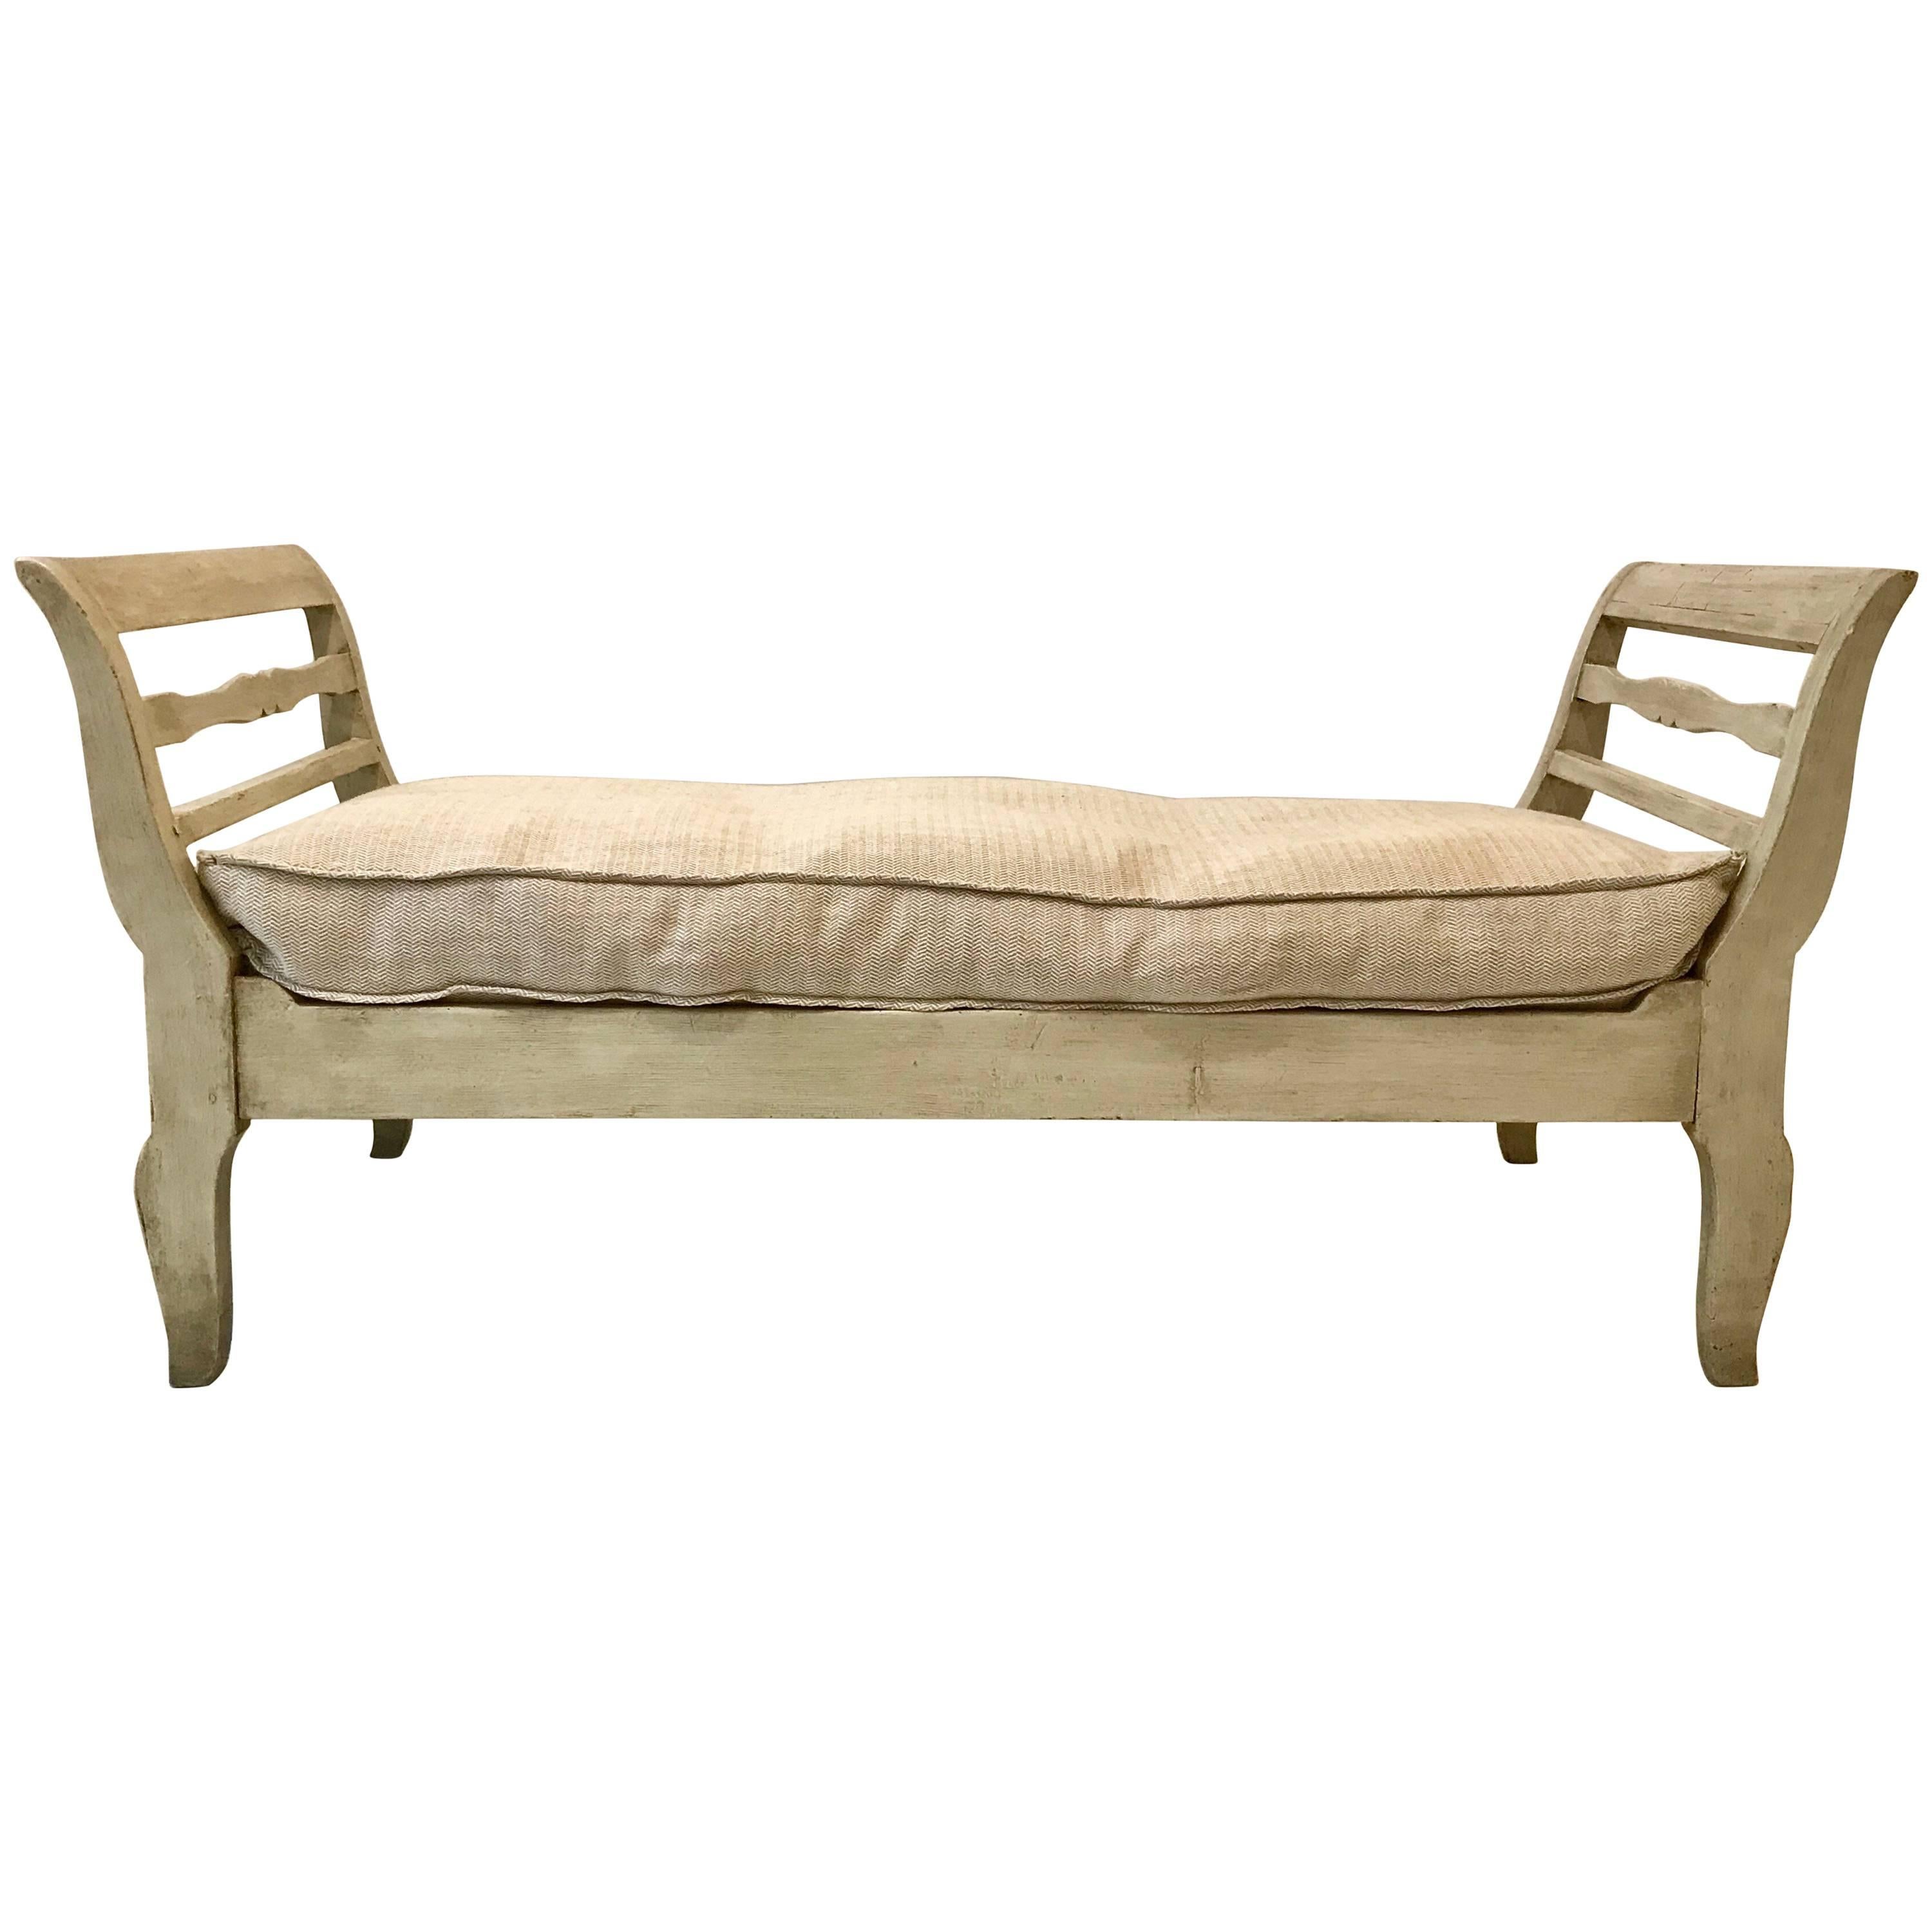 A fetching French provincial daybed having gracefully out swept arms and an older attractive dove grey paint finish. The frame shows very gentle wear throughout and is tight and ready for everyday use in any fine interior. The daybed sells and ships